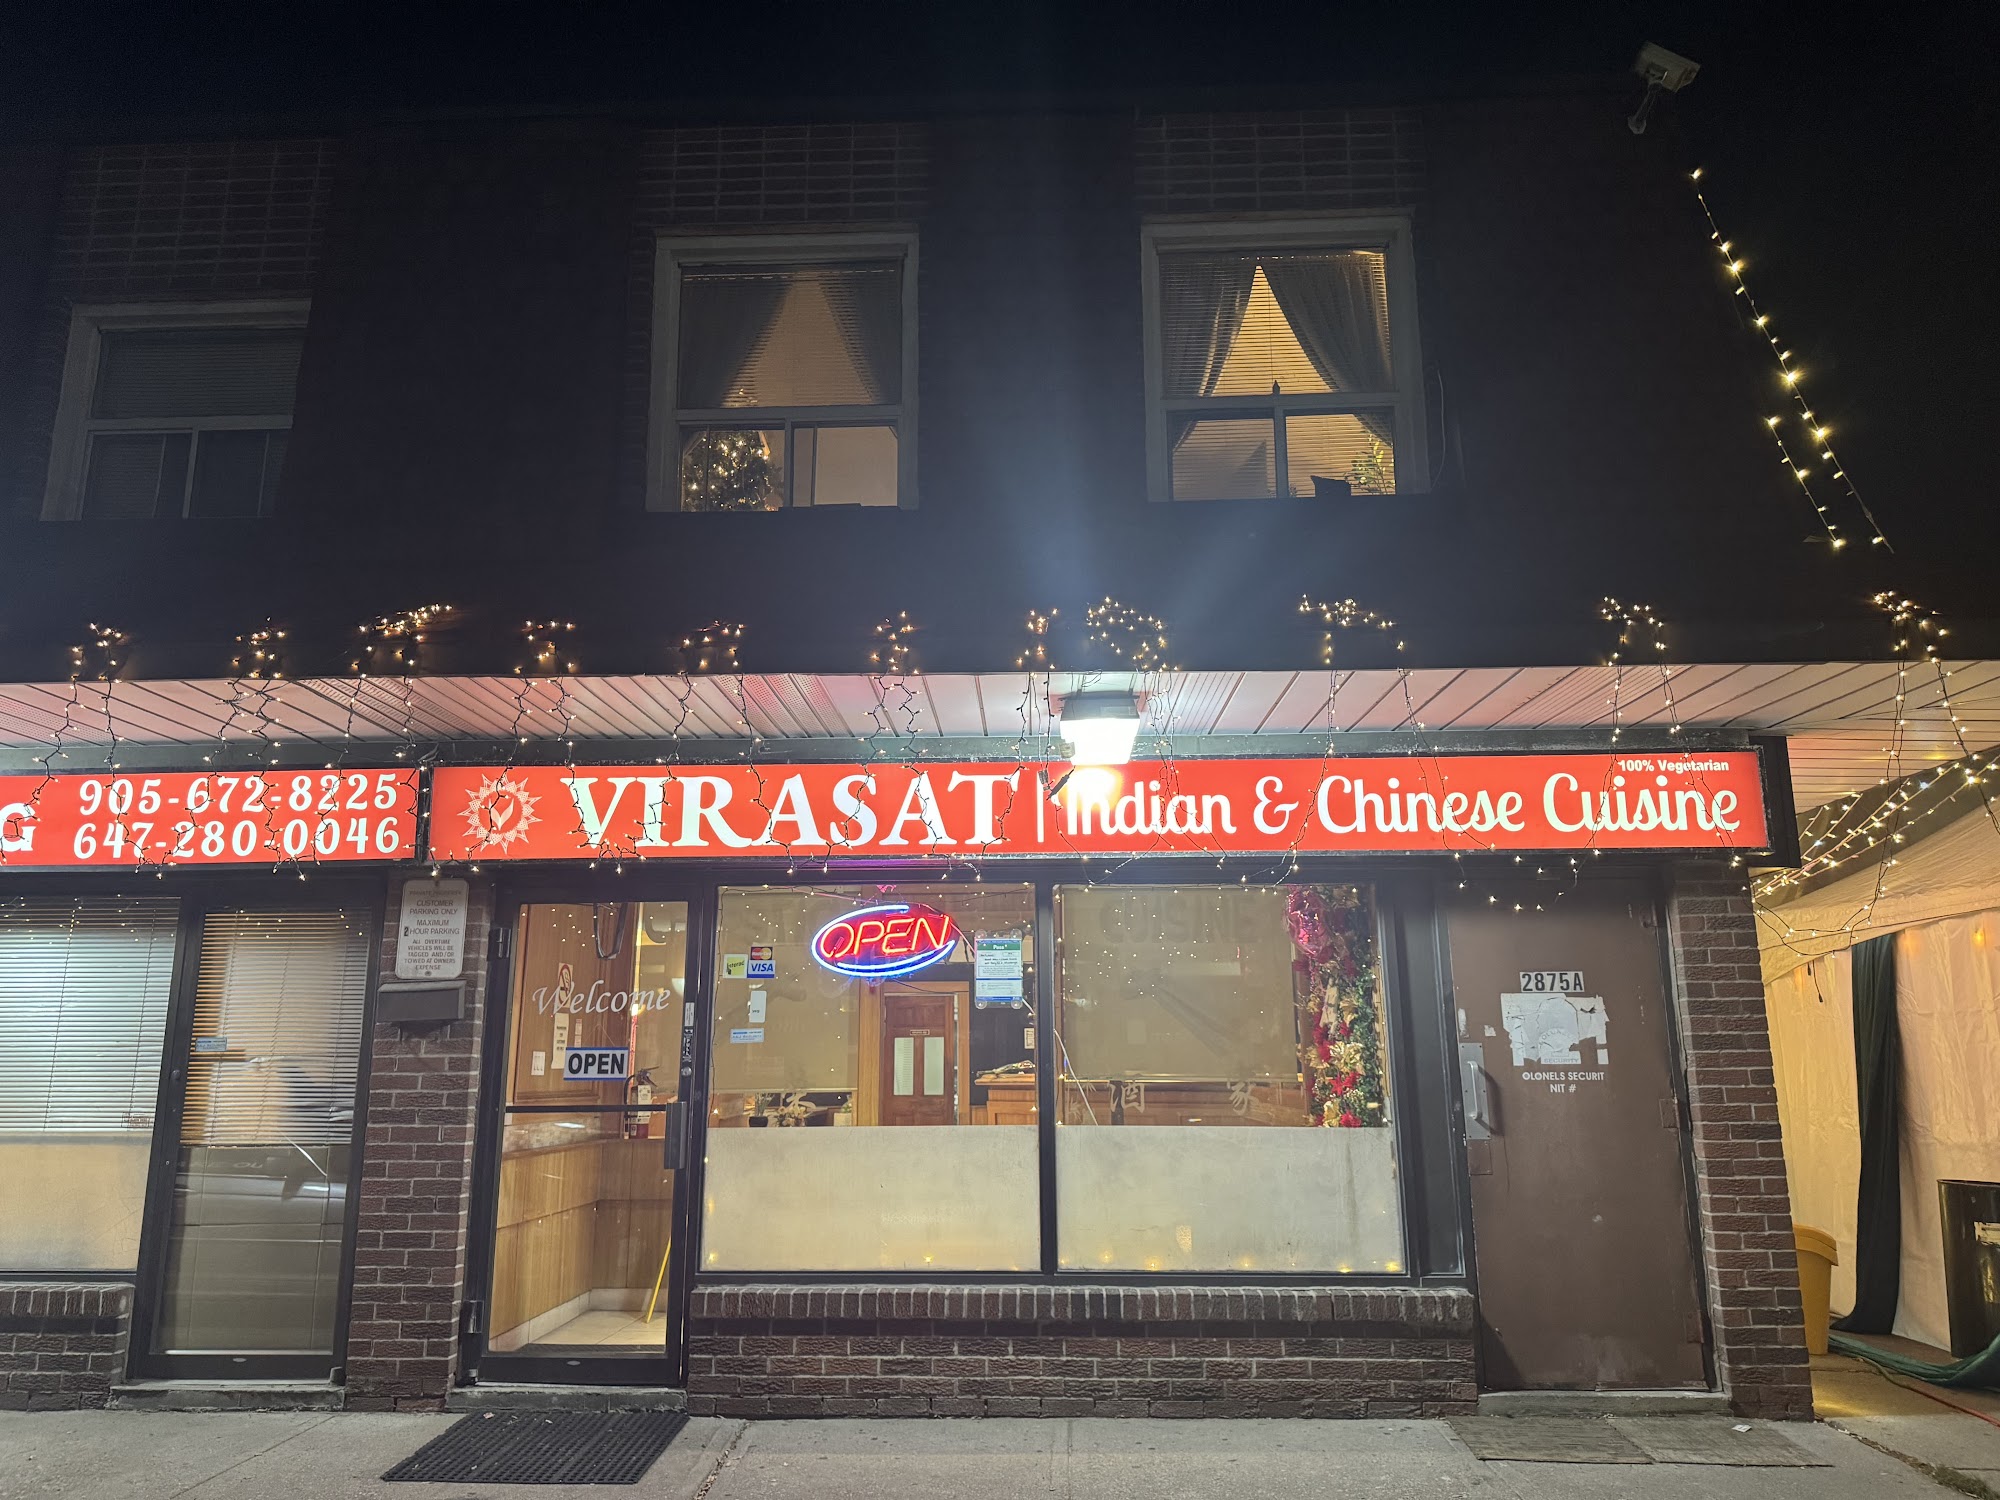 Virasat Indian and Chinese Cuisine